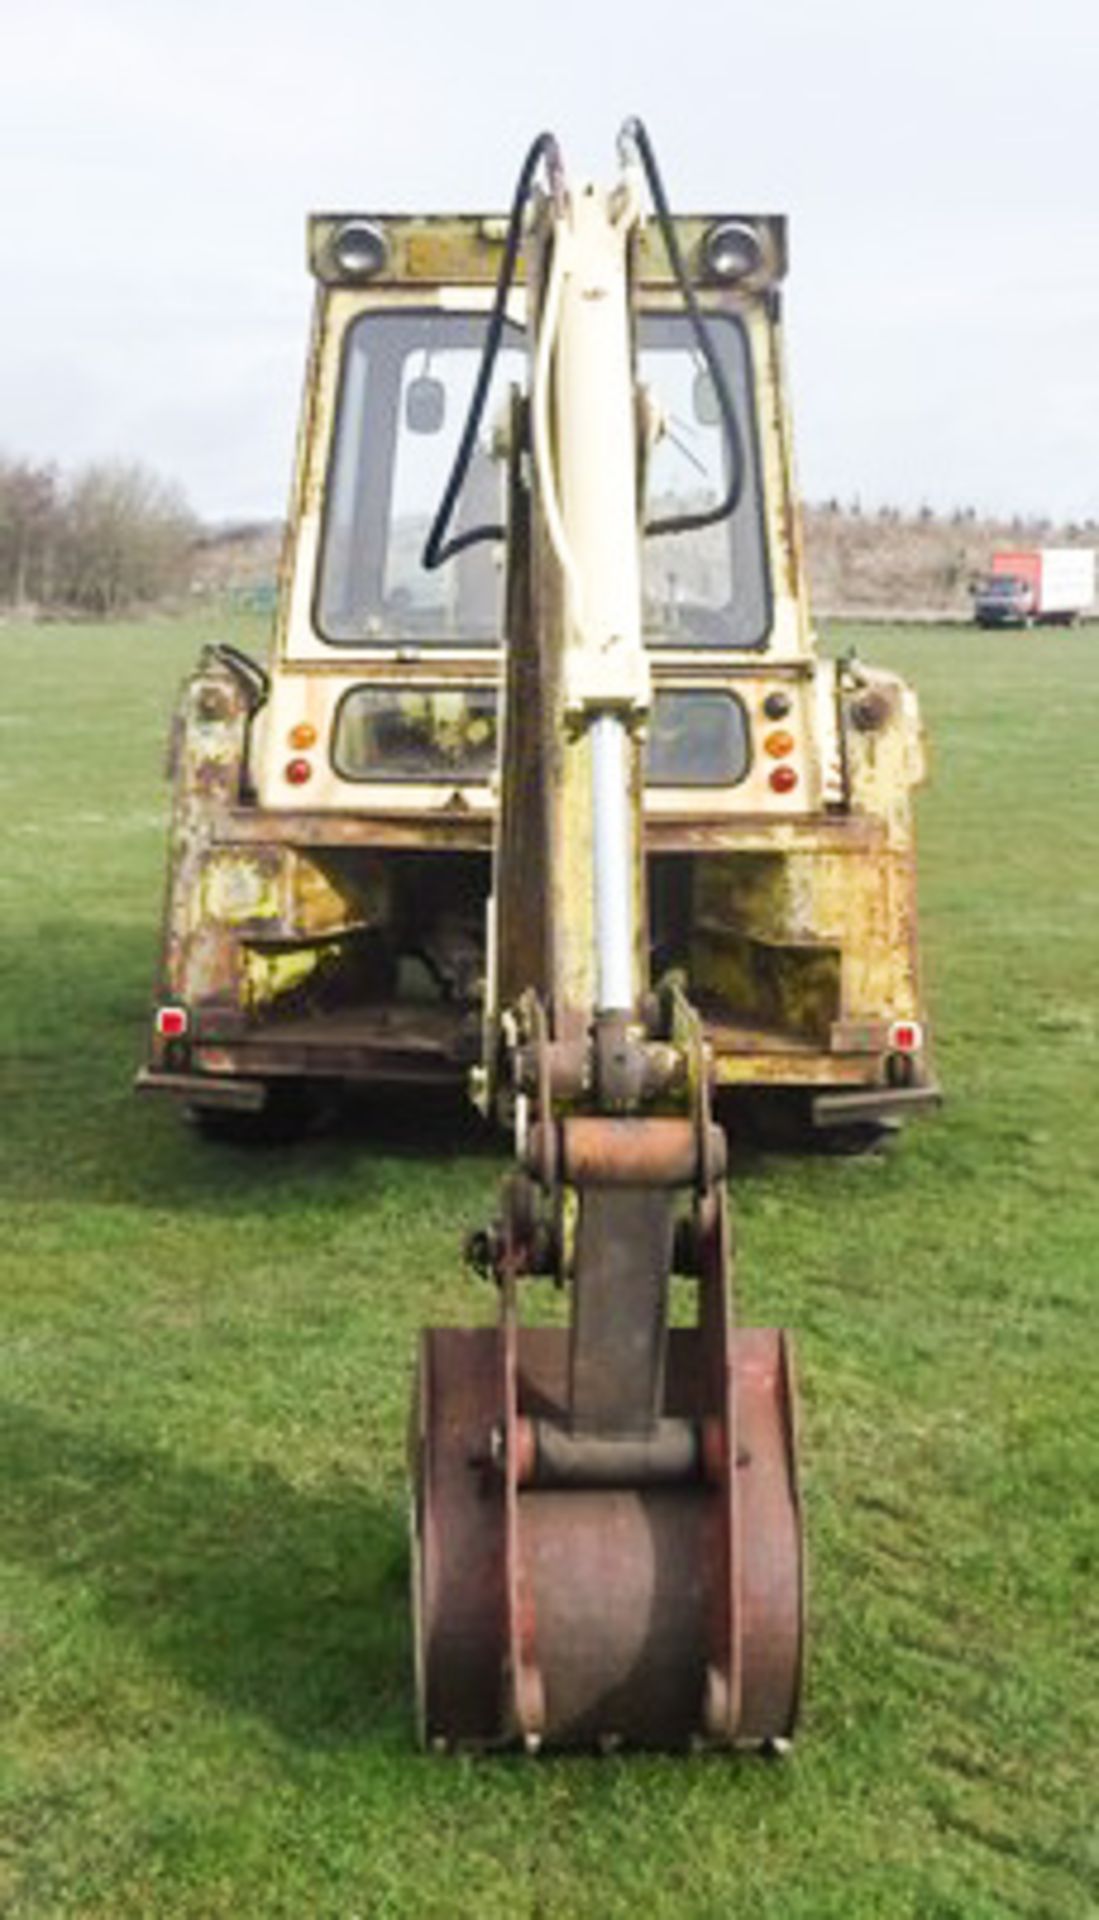 1972/1973 HYMAC 270 BACKHOE LOADER, SN 207-270, 4182 HOURS (NOT VERIFIED), ENGINE NO C407354, CHASSI - Image 6 of 11